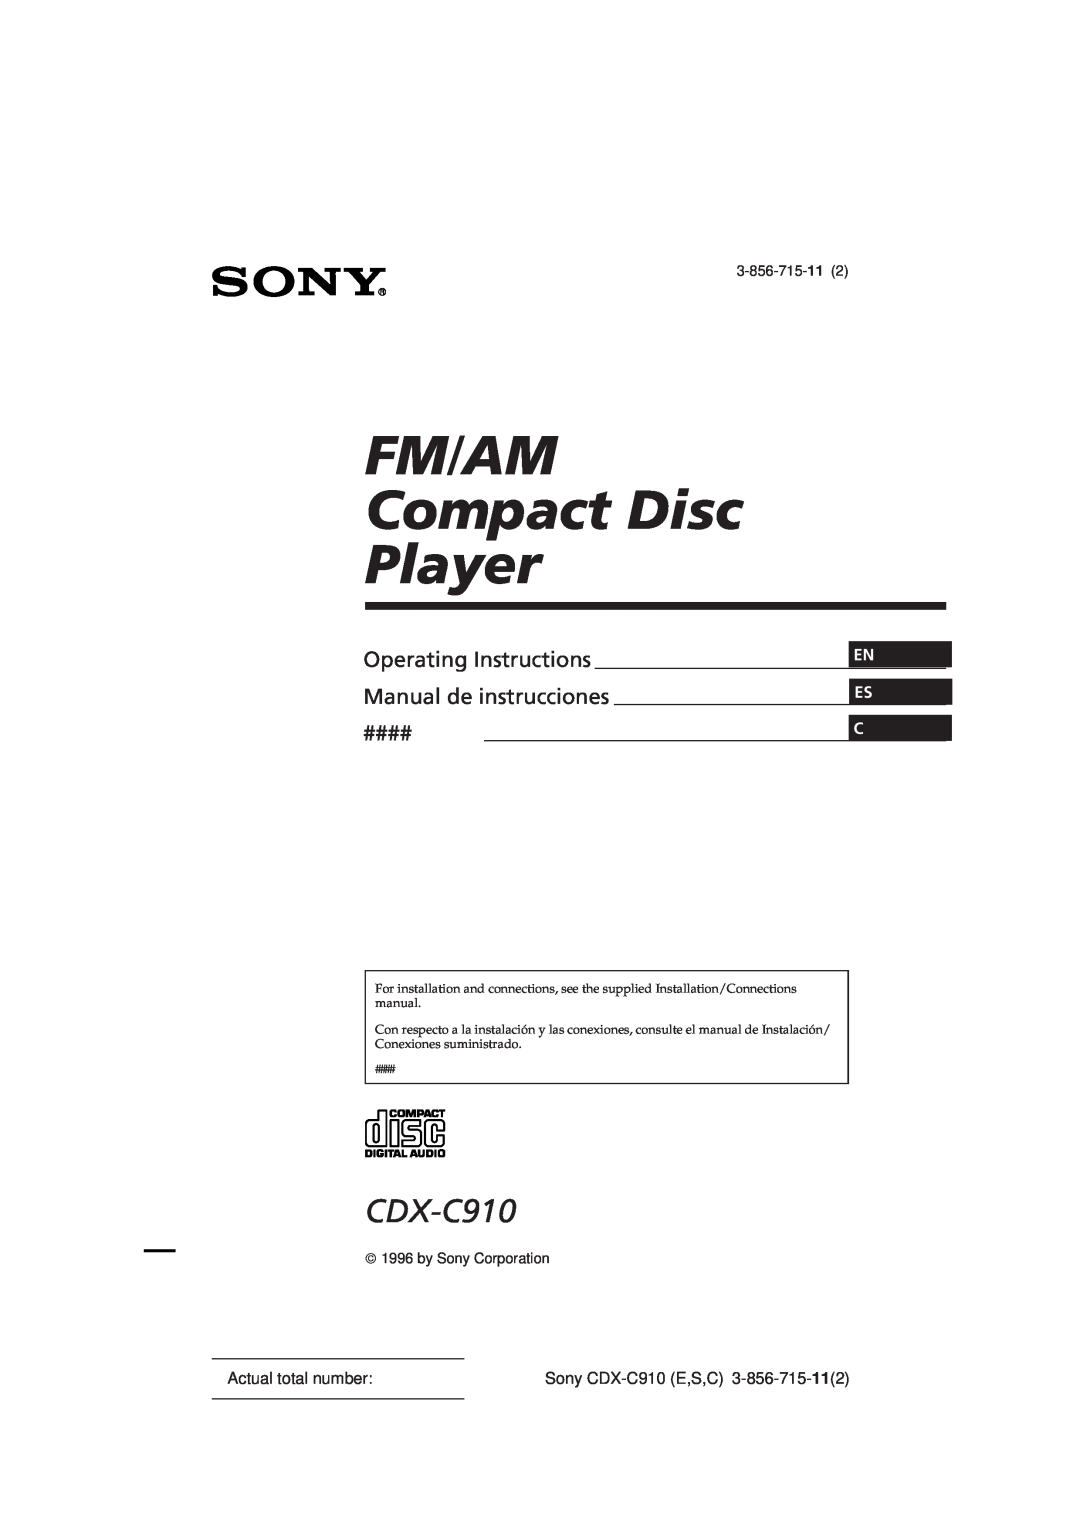 Sony manual En Es C, Actual total number, Sony CDX-C910E,S,C, 3-856-715-11, by Sony Corporation, #### 